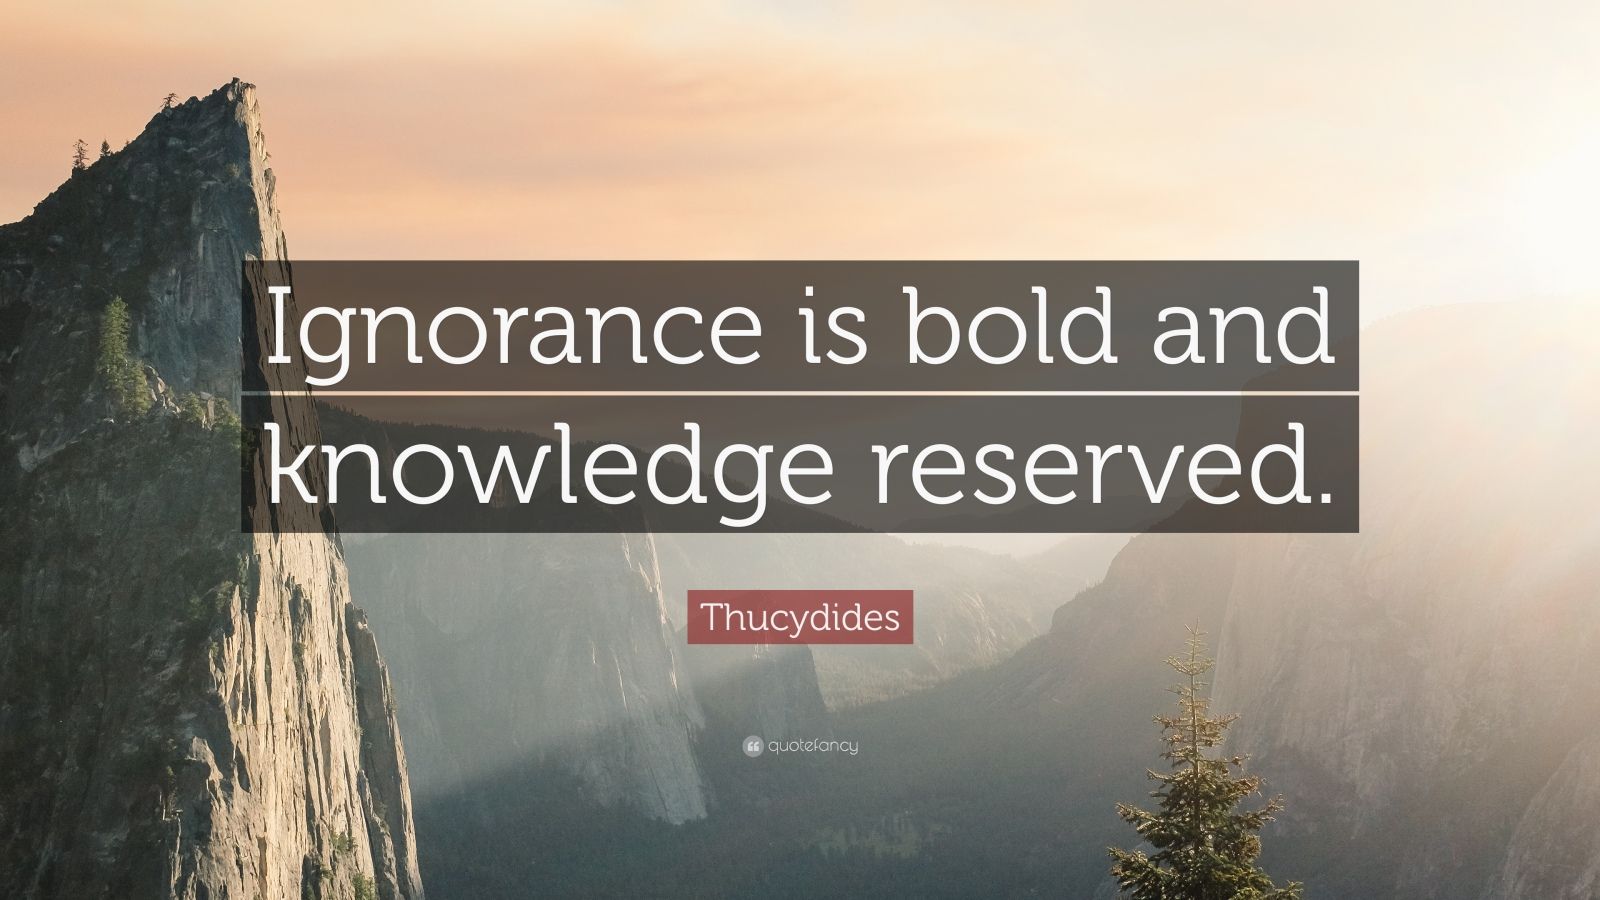 Thucydides Quote: “Ignorance is bold and knowledge reserved.” (10 ...